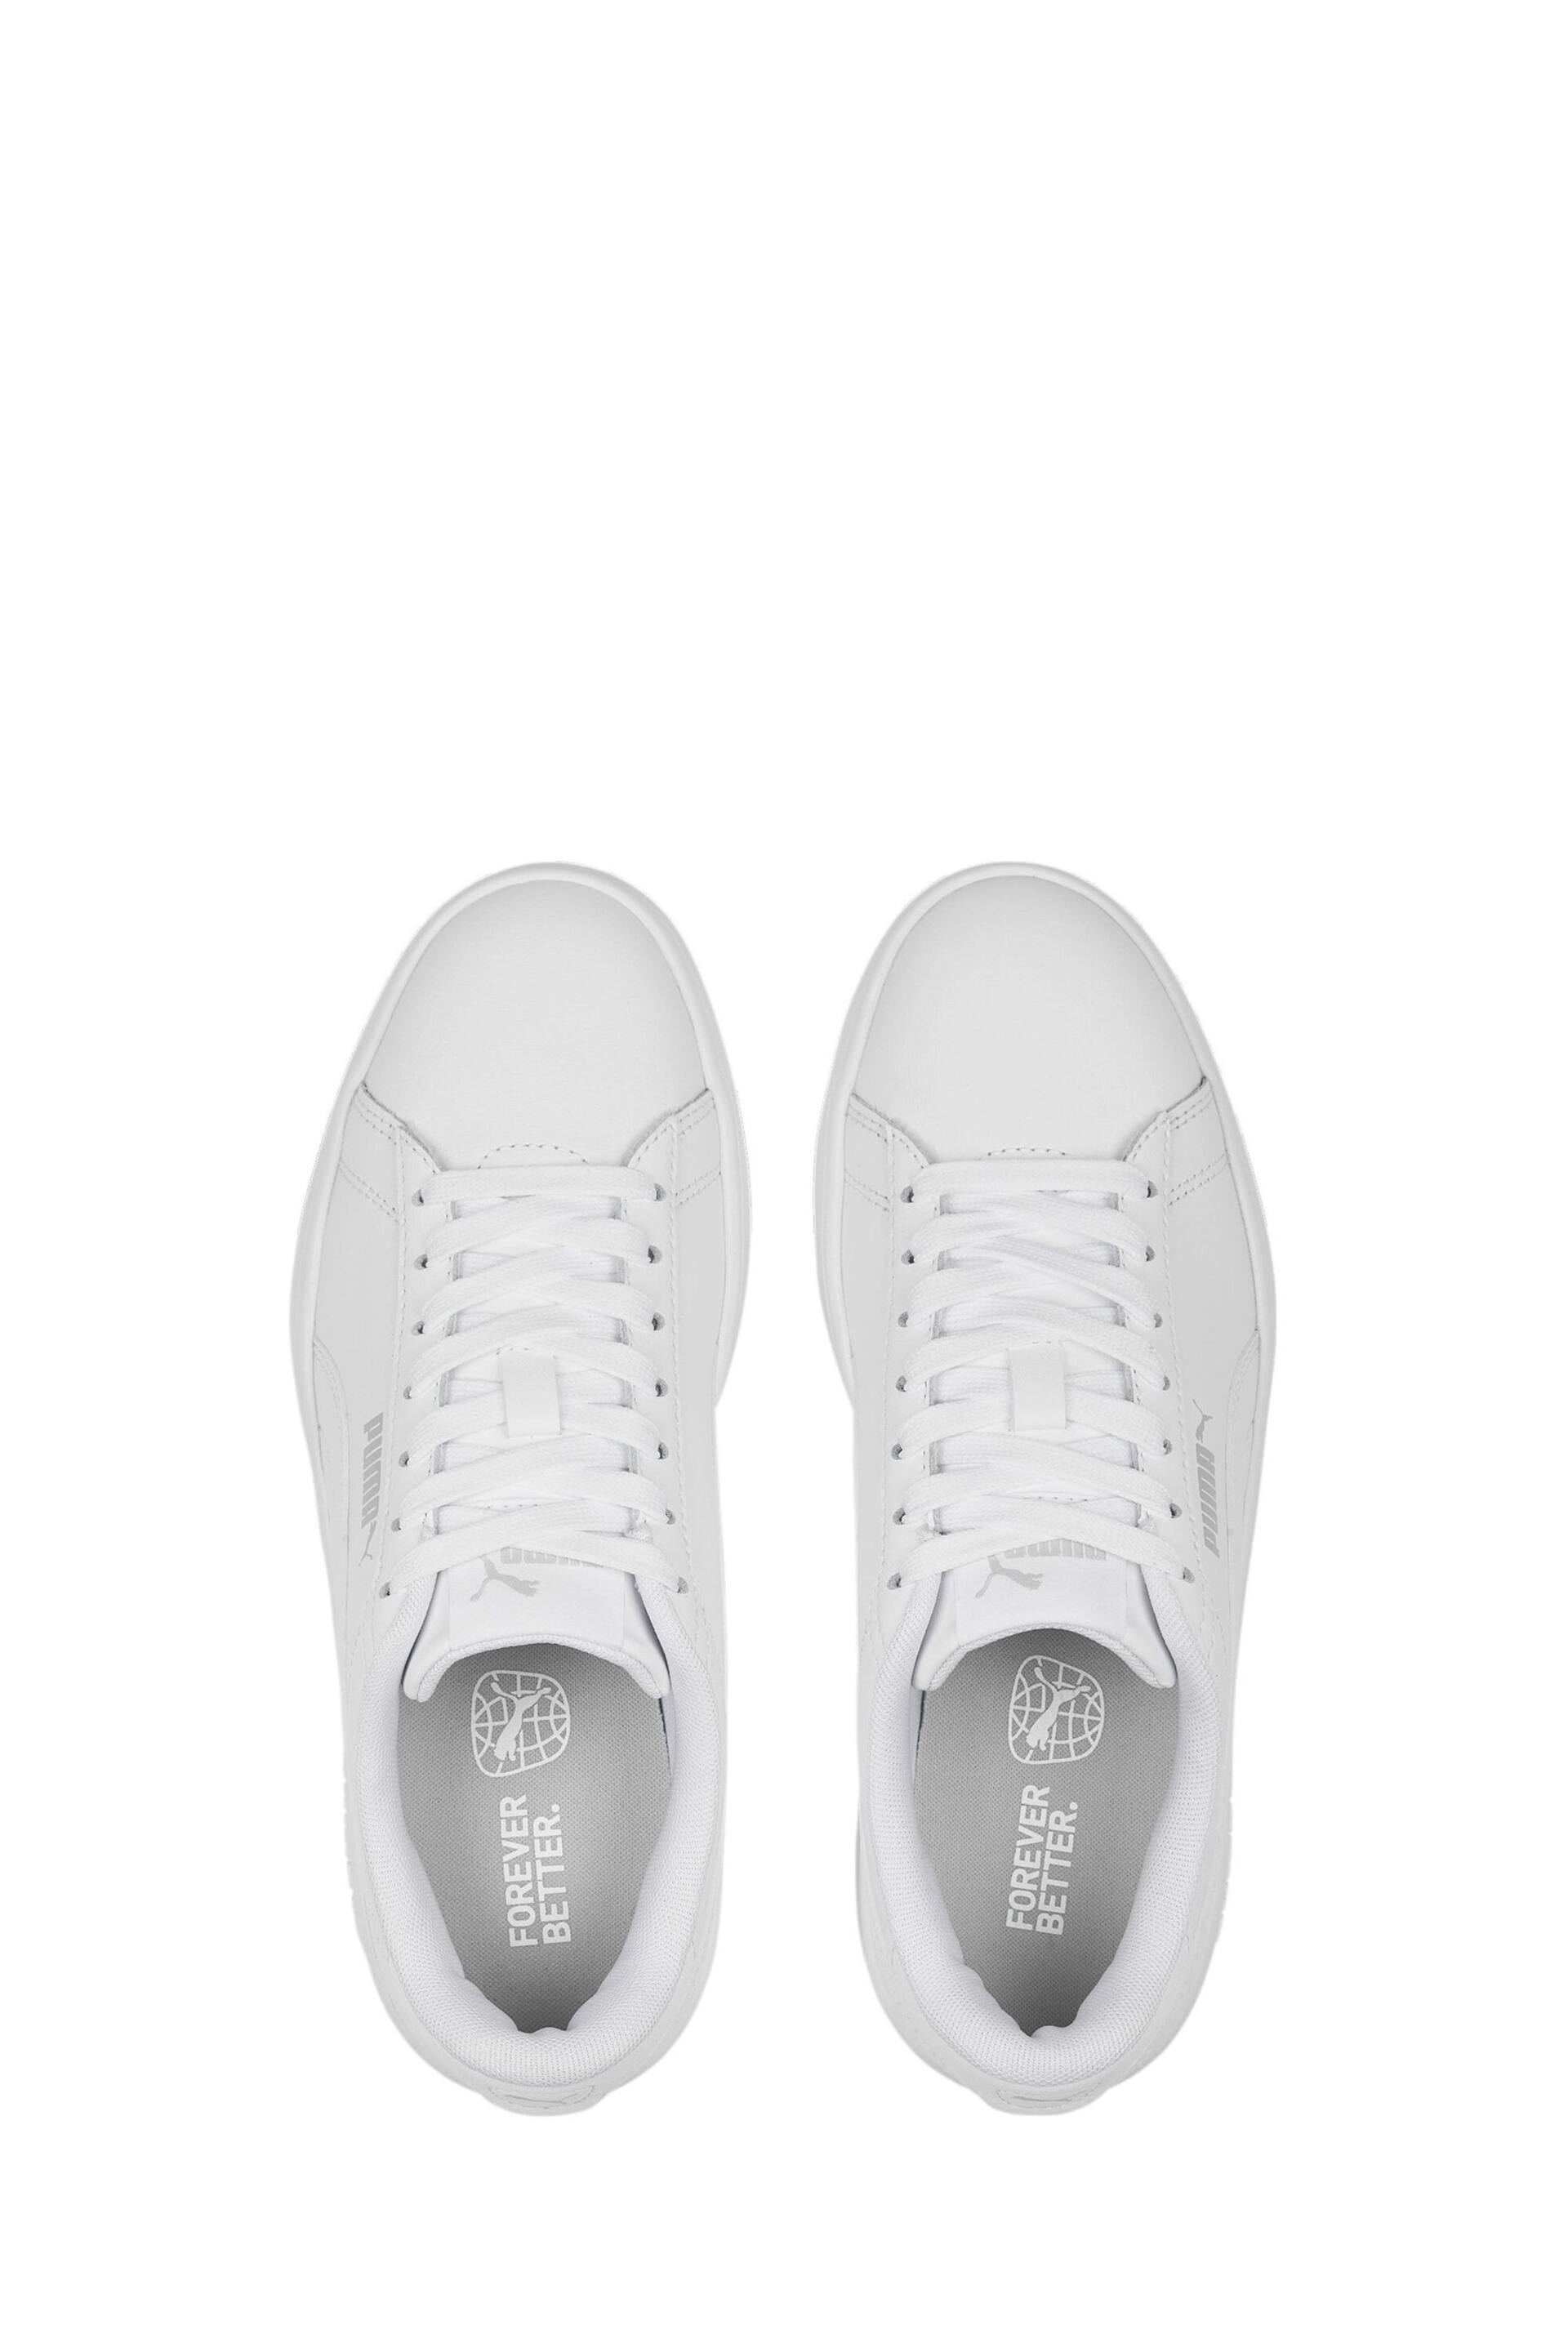 Puma White Smash 3.0 Leather Youth Trainers - Image 5 of 6